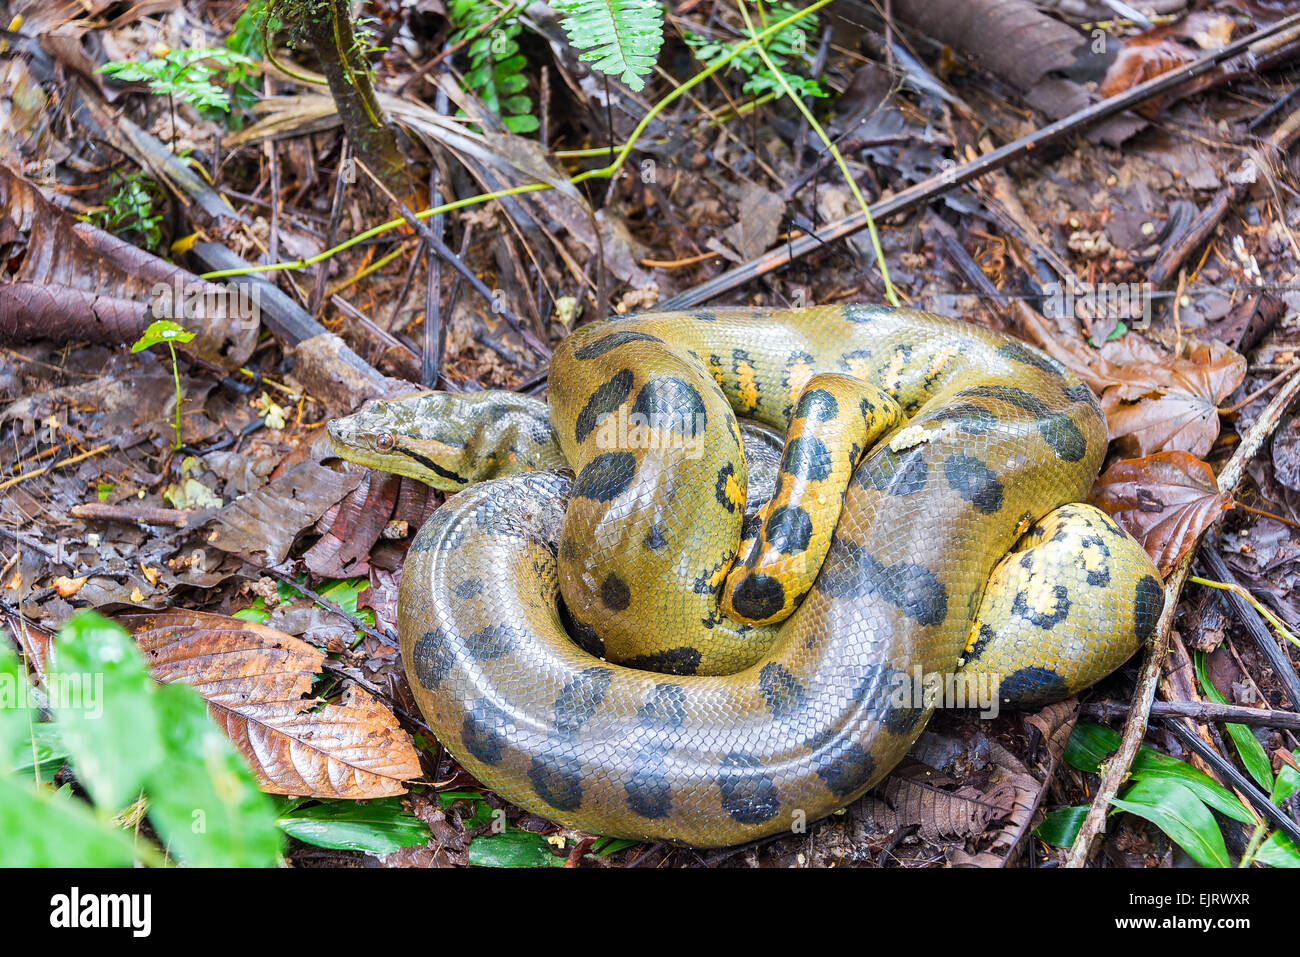 A Coiled Up Green Anaconda Seen Deep In The Amazon Rainforest In Peru Stock Photo Alamy